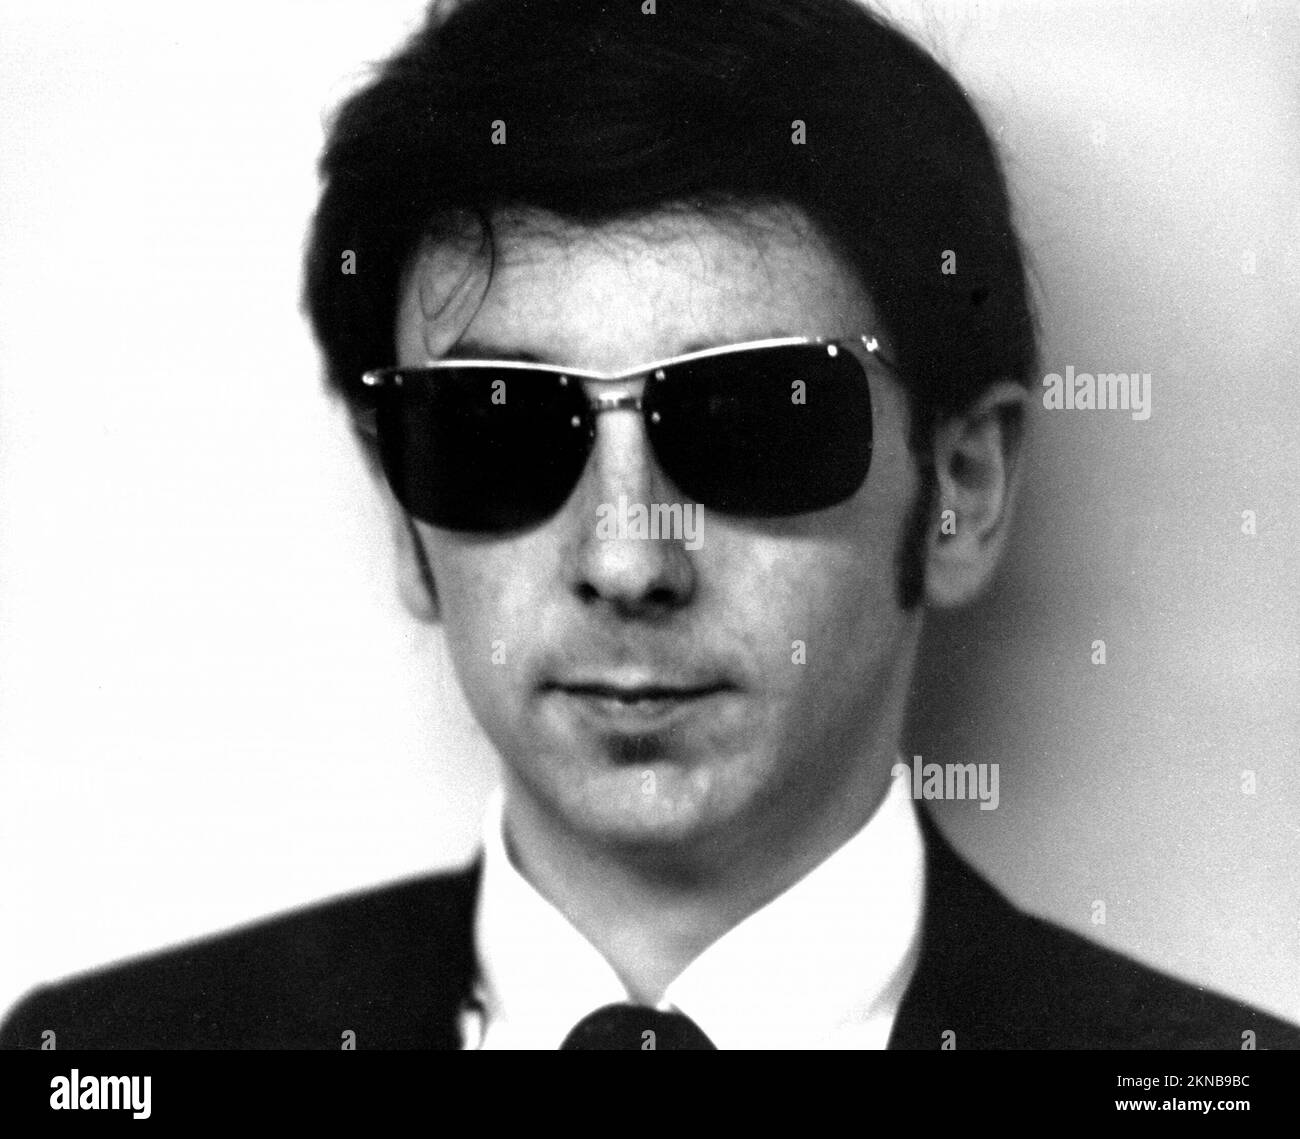 PHIL SPECTOR in SPECTOR (2022), directed by DON ARGOTT and SHEENA M. JOYCE. Credit: Lightbox / Showtime Documentary Films / Album Stock Photo